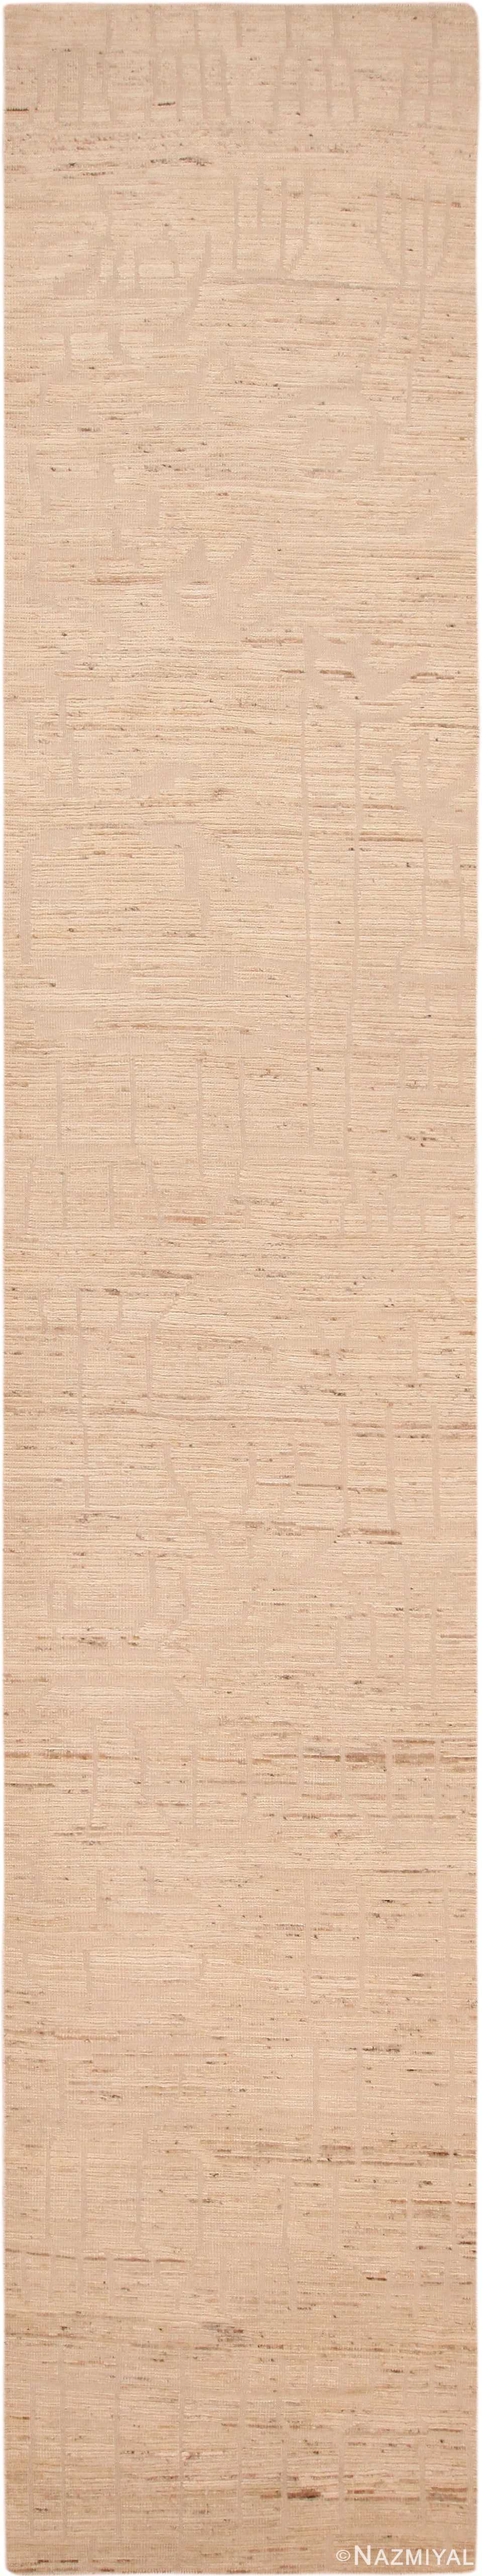 Cream Color Modern Moroccan Style Runner Rug 61063 by Nazmiyal Antique Rugs